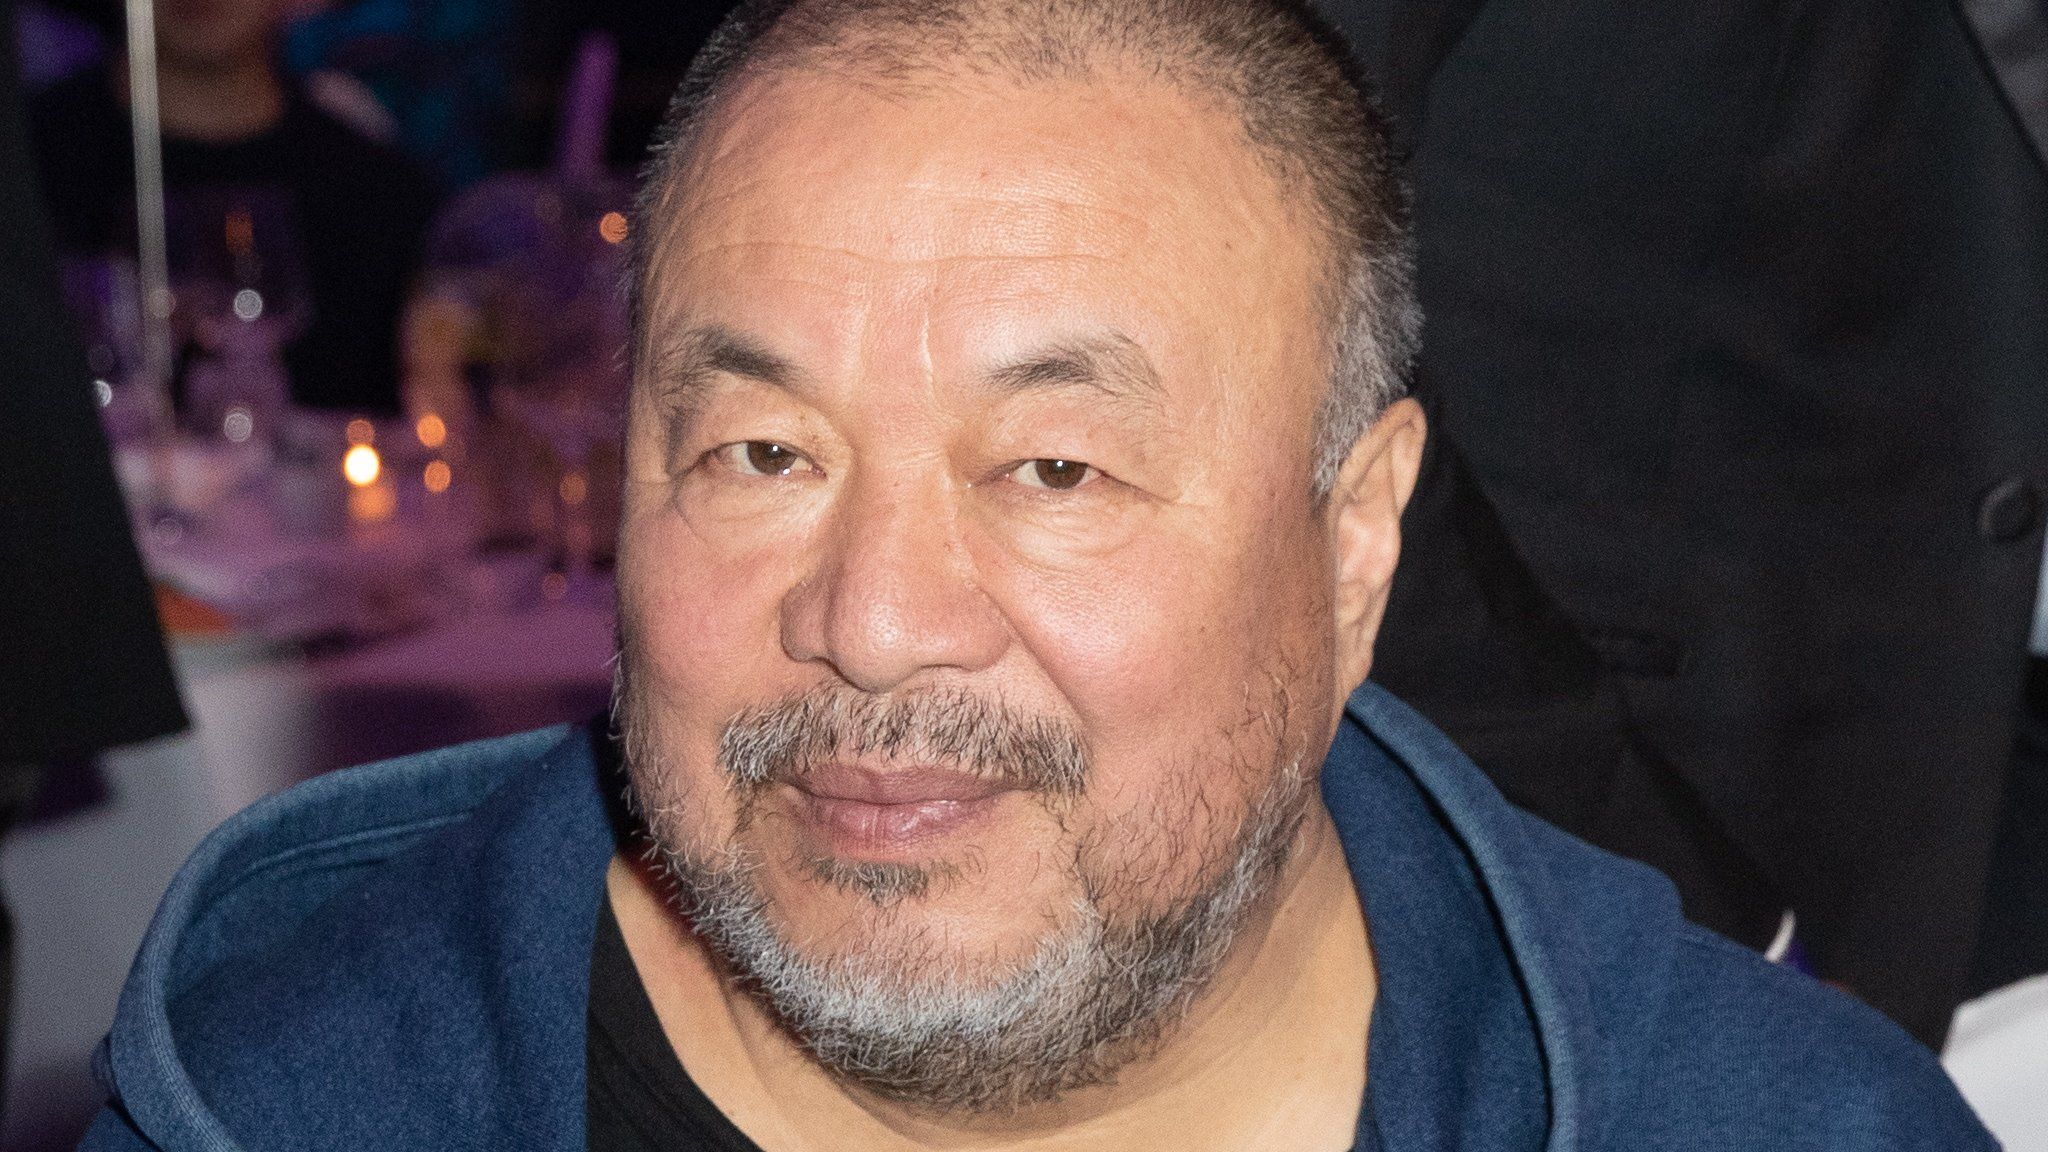 Ai Weiwei attended the Cinema For Peace Gala at the Berlin Film Festival on 11 February